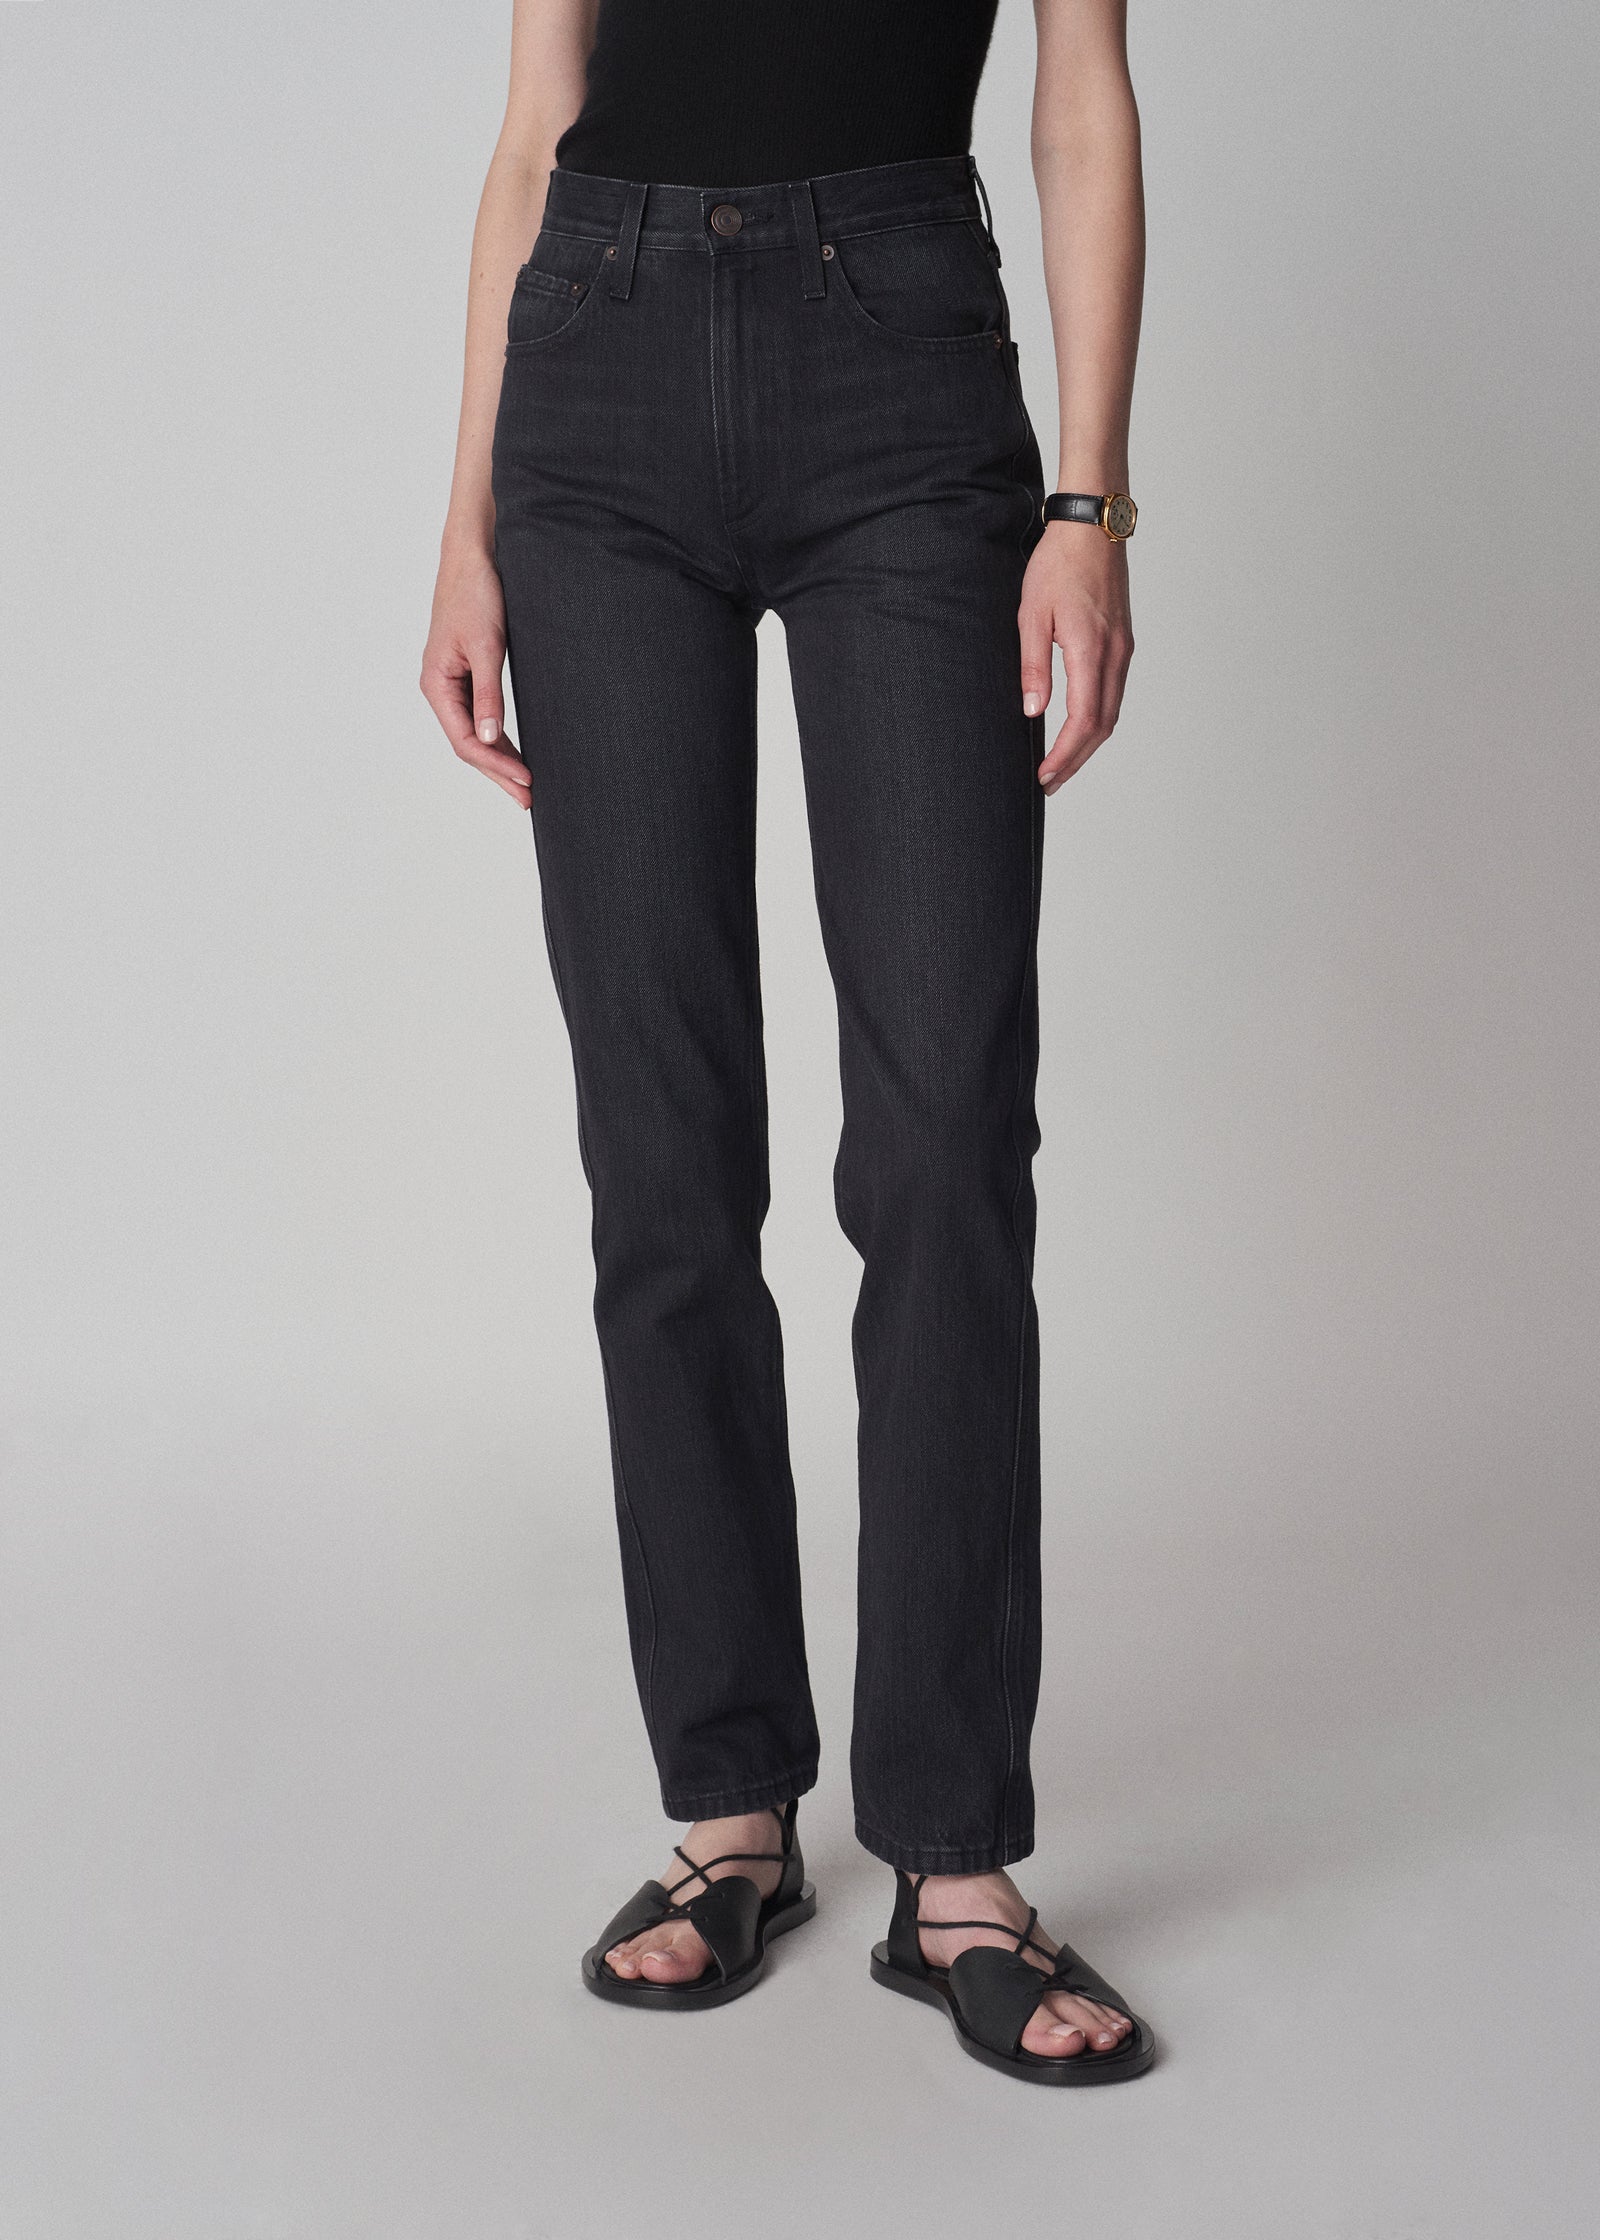 High Rise Jean in Denim - Washed Black - CO Collections